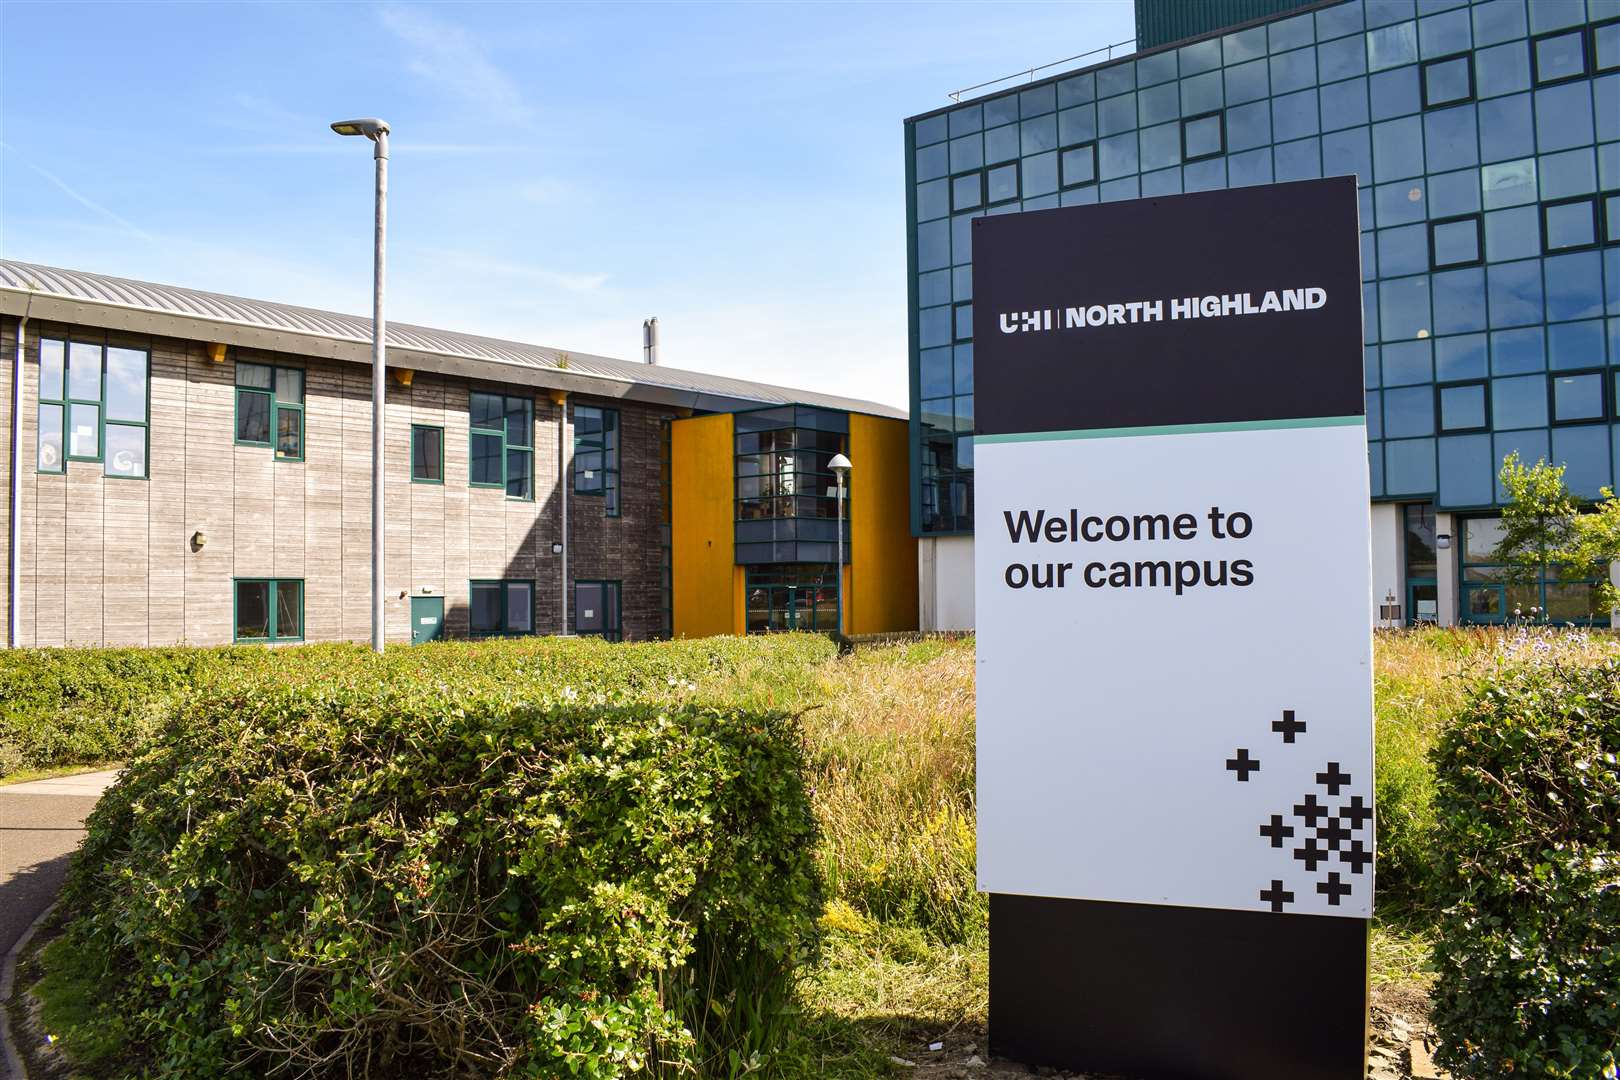 The UHI North Highland campus will be the setting for one of the two meetings. The other one will be held in Castletown.